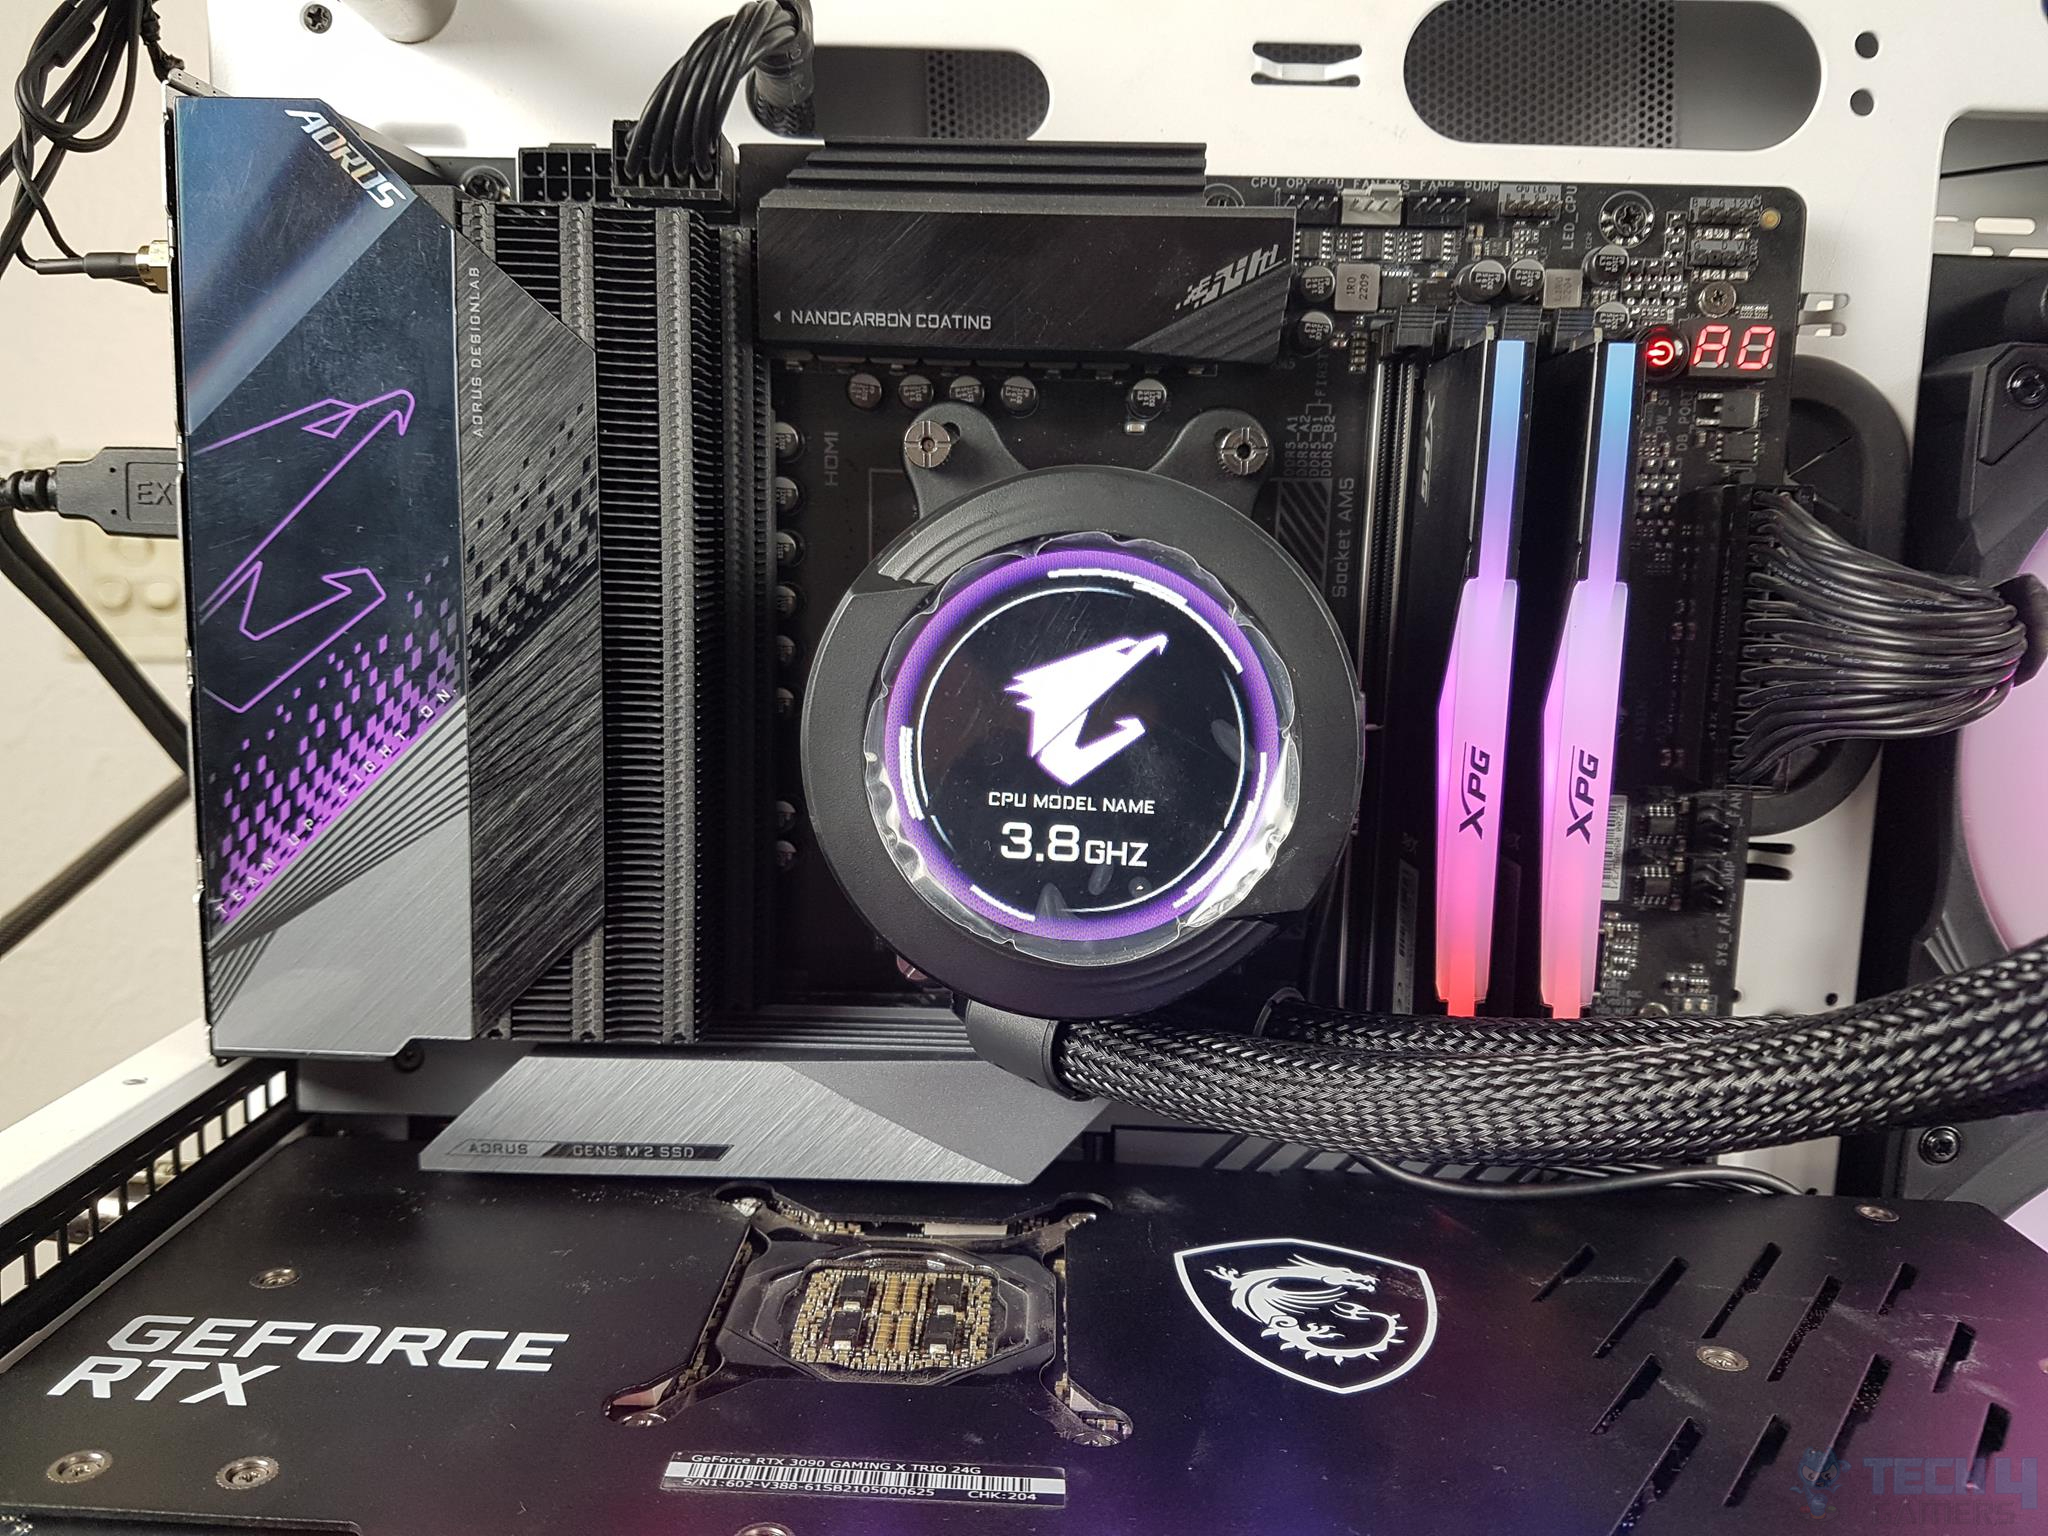 AORUS WATERFORCE X 280 Installed on the motherboard